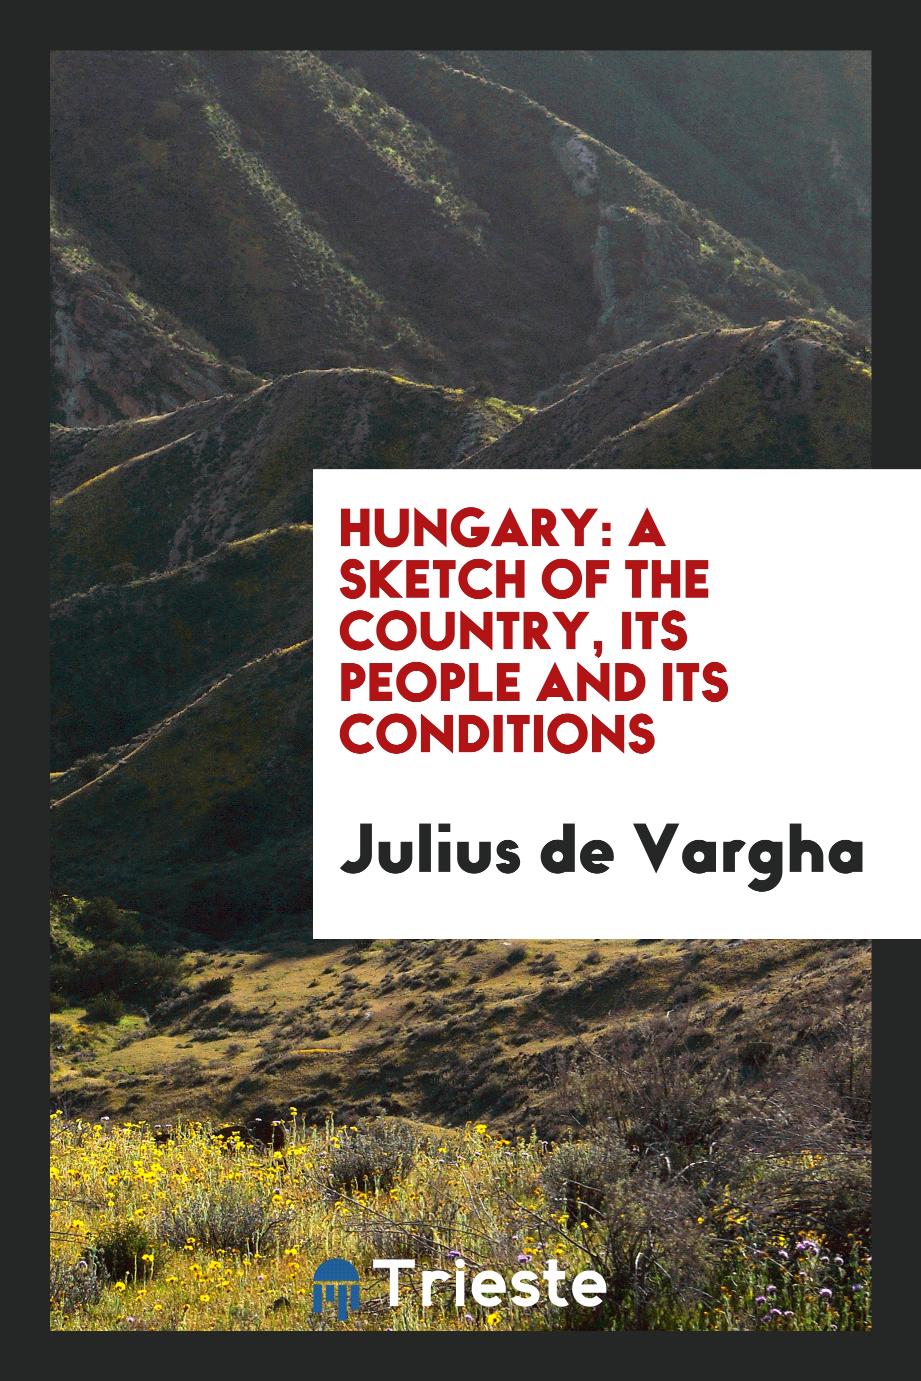 Hungary: A Sketch of the Country, Its People and Its Conditions